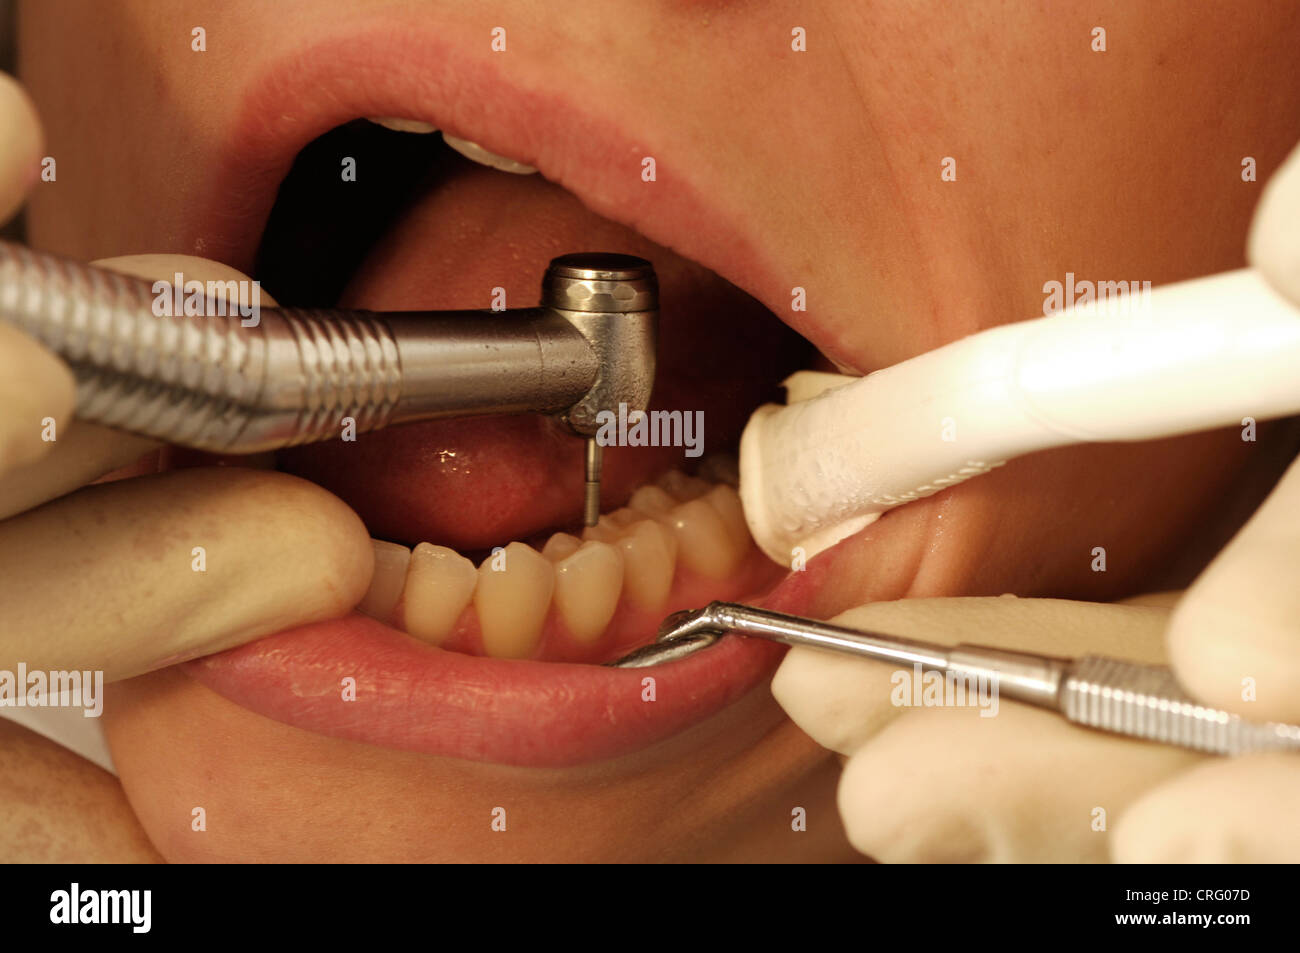 Close-up of a dental drill being used to remove the decayed part of a patient's tooth. Stock Photo